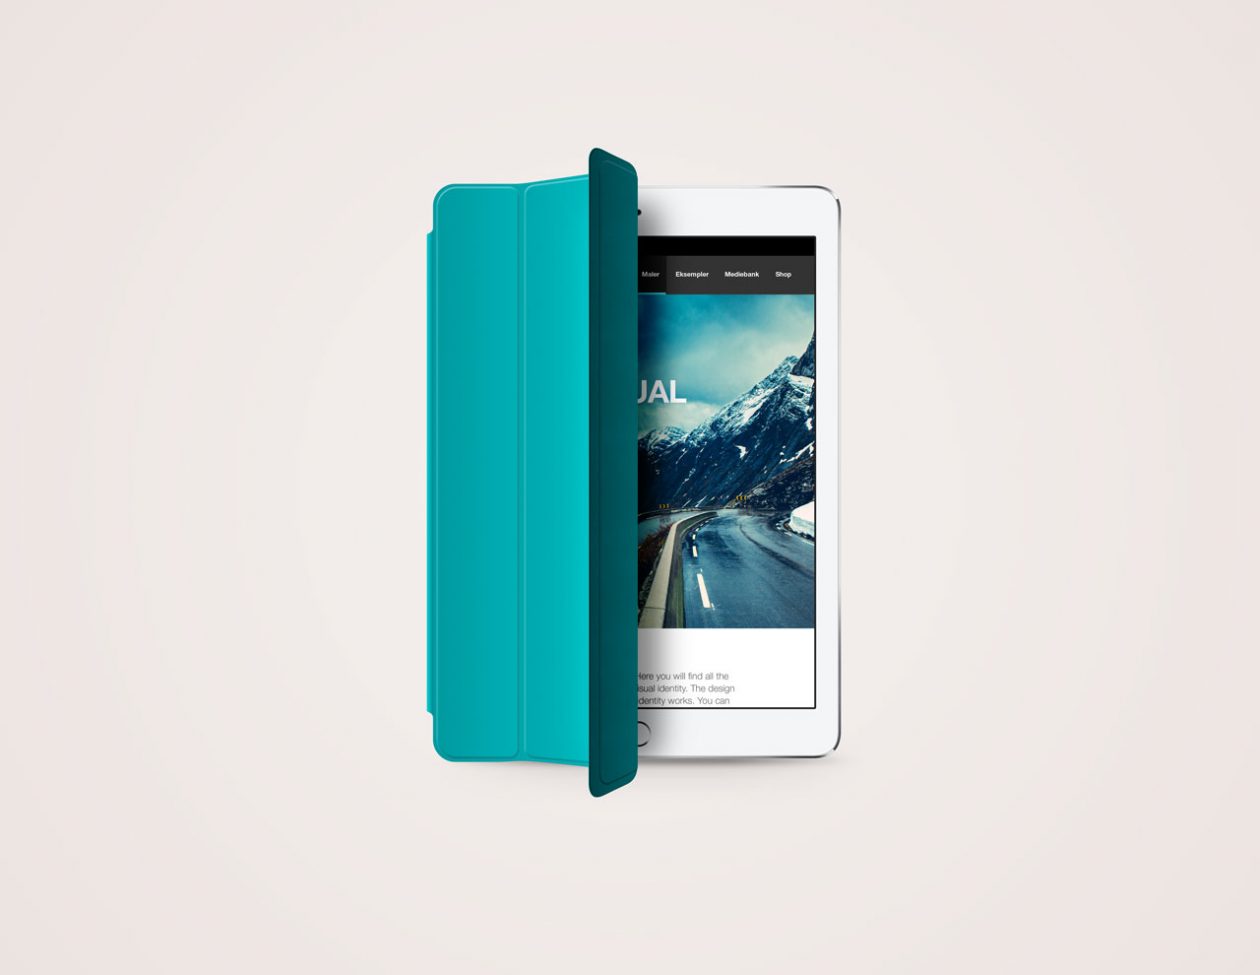 9-abax-ipad-air-2-whit-smartcover-mockup